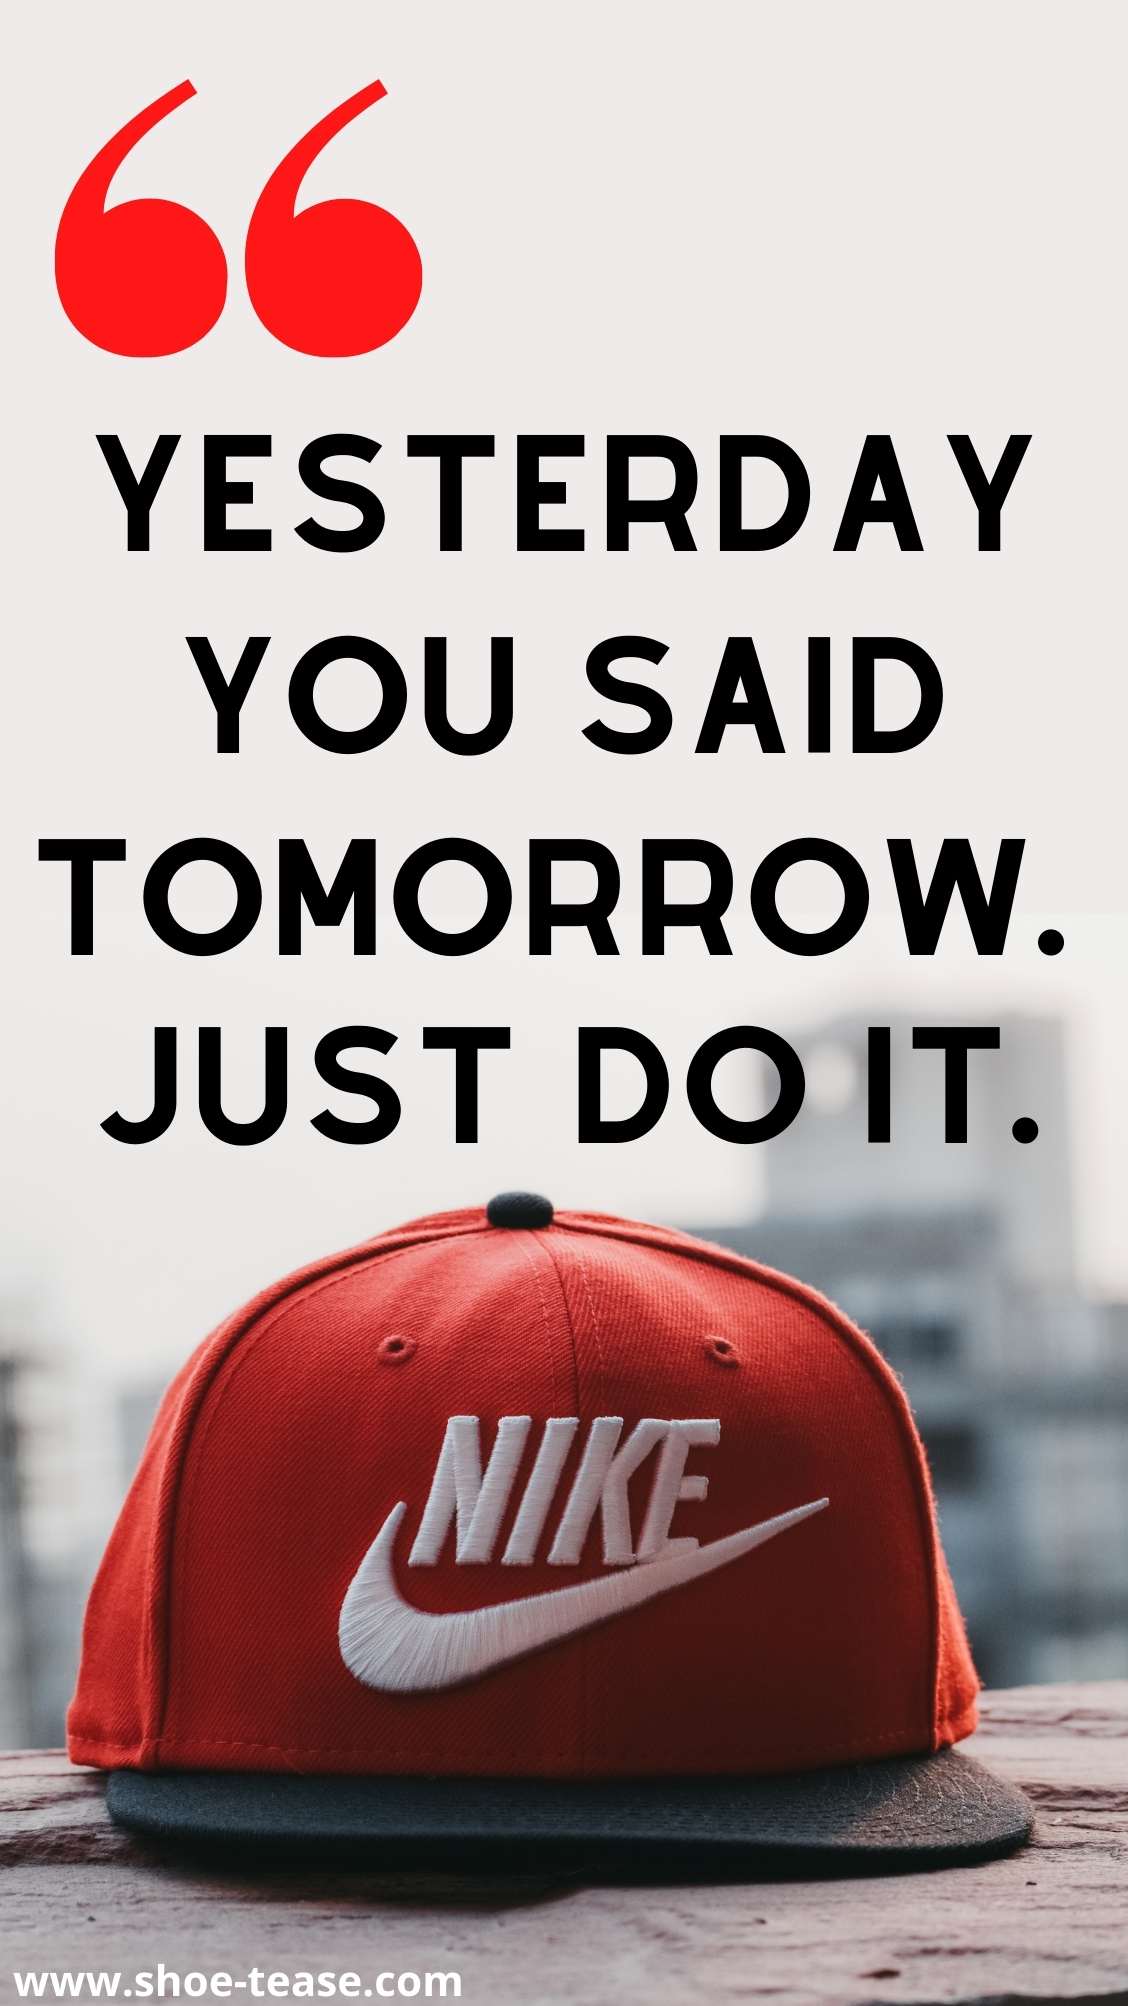 nike motivational quotes for athletes